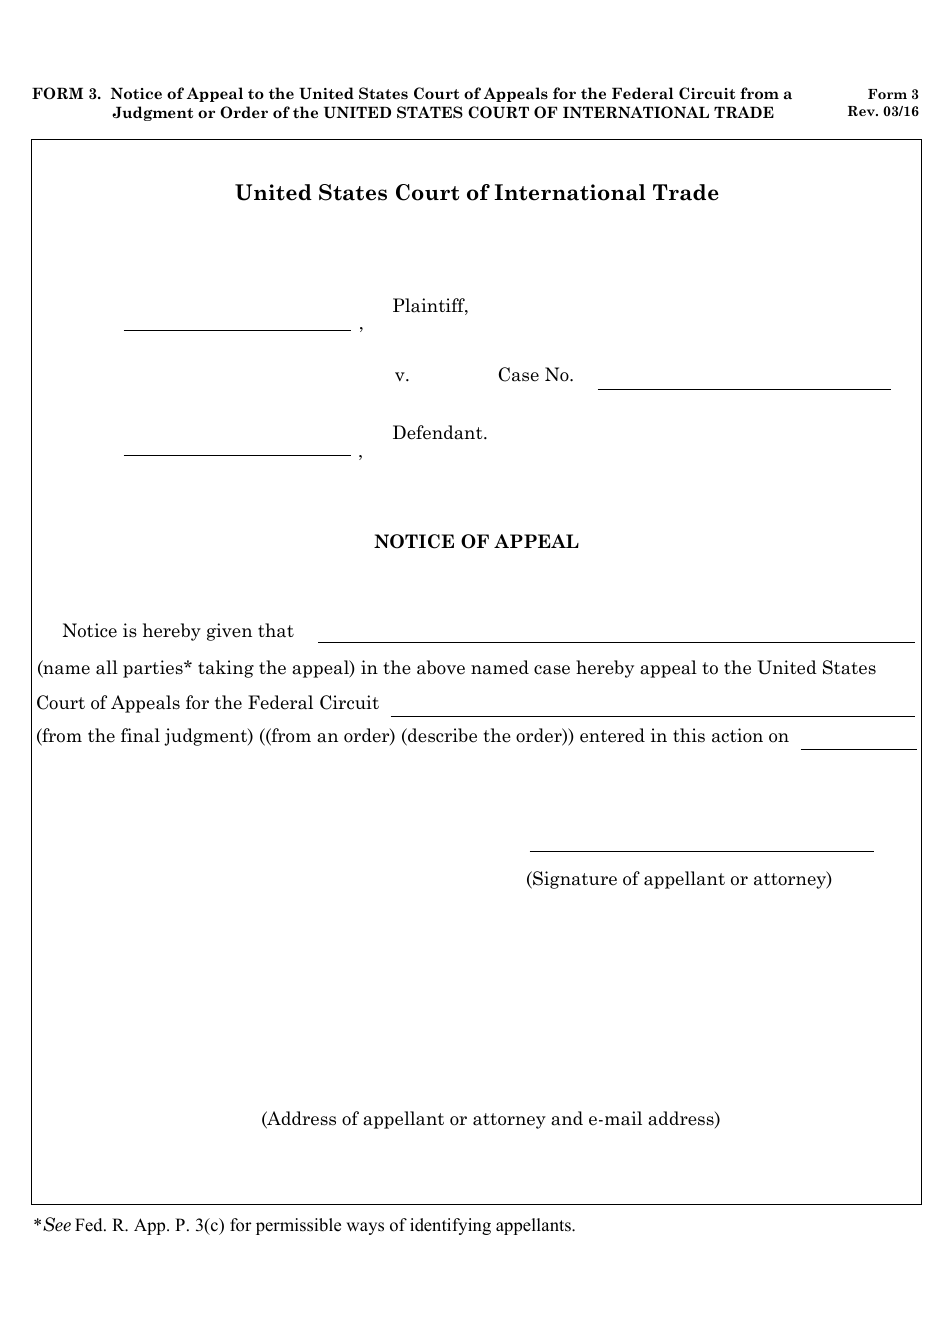 Form 3 Notice of Appeal to the United States Court of Appeals for the Federal Circuit From a Judgment or Order of the Court of International Trade, Page 1